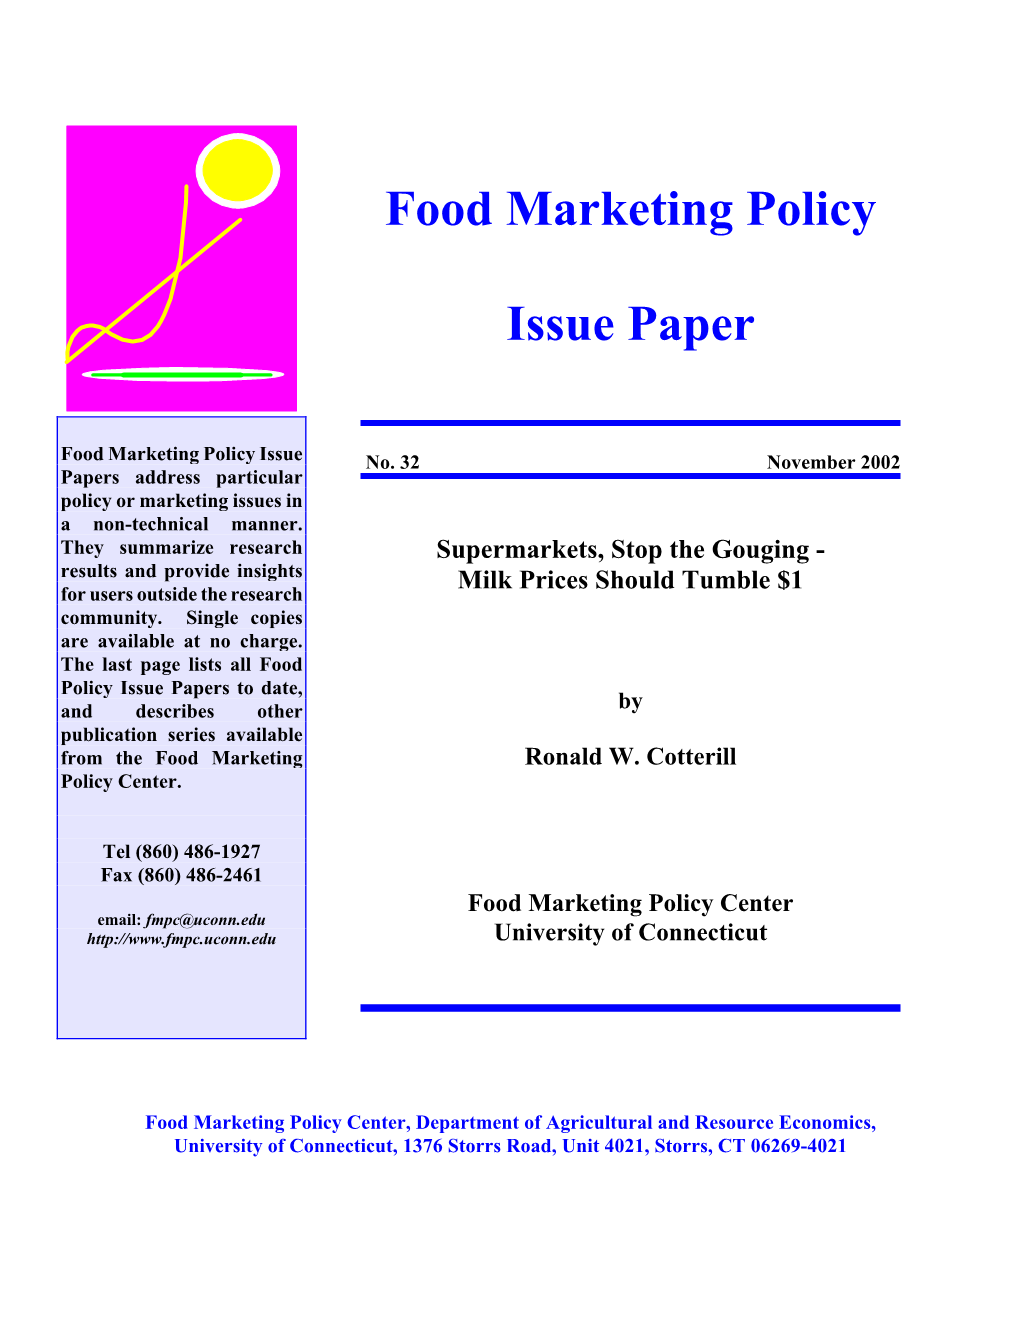 Food Marketing Policy Issue Paper